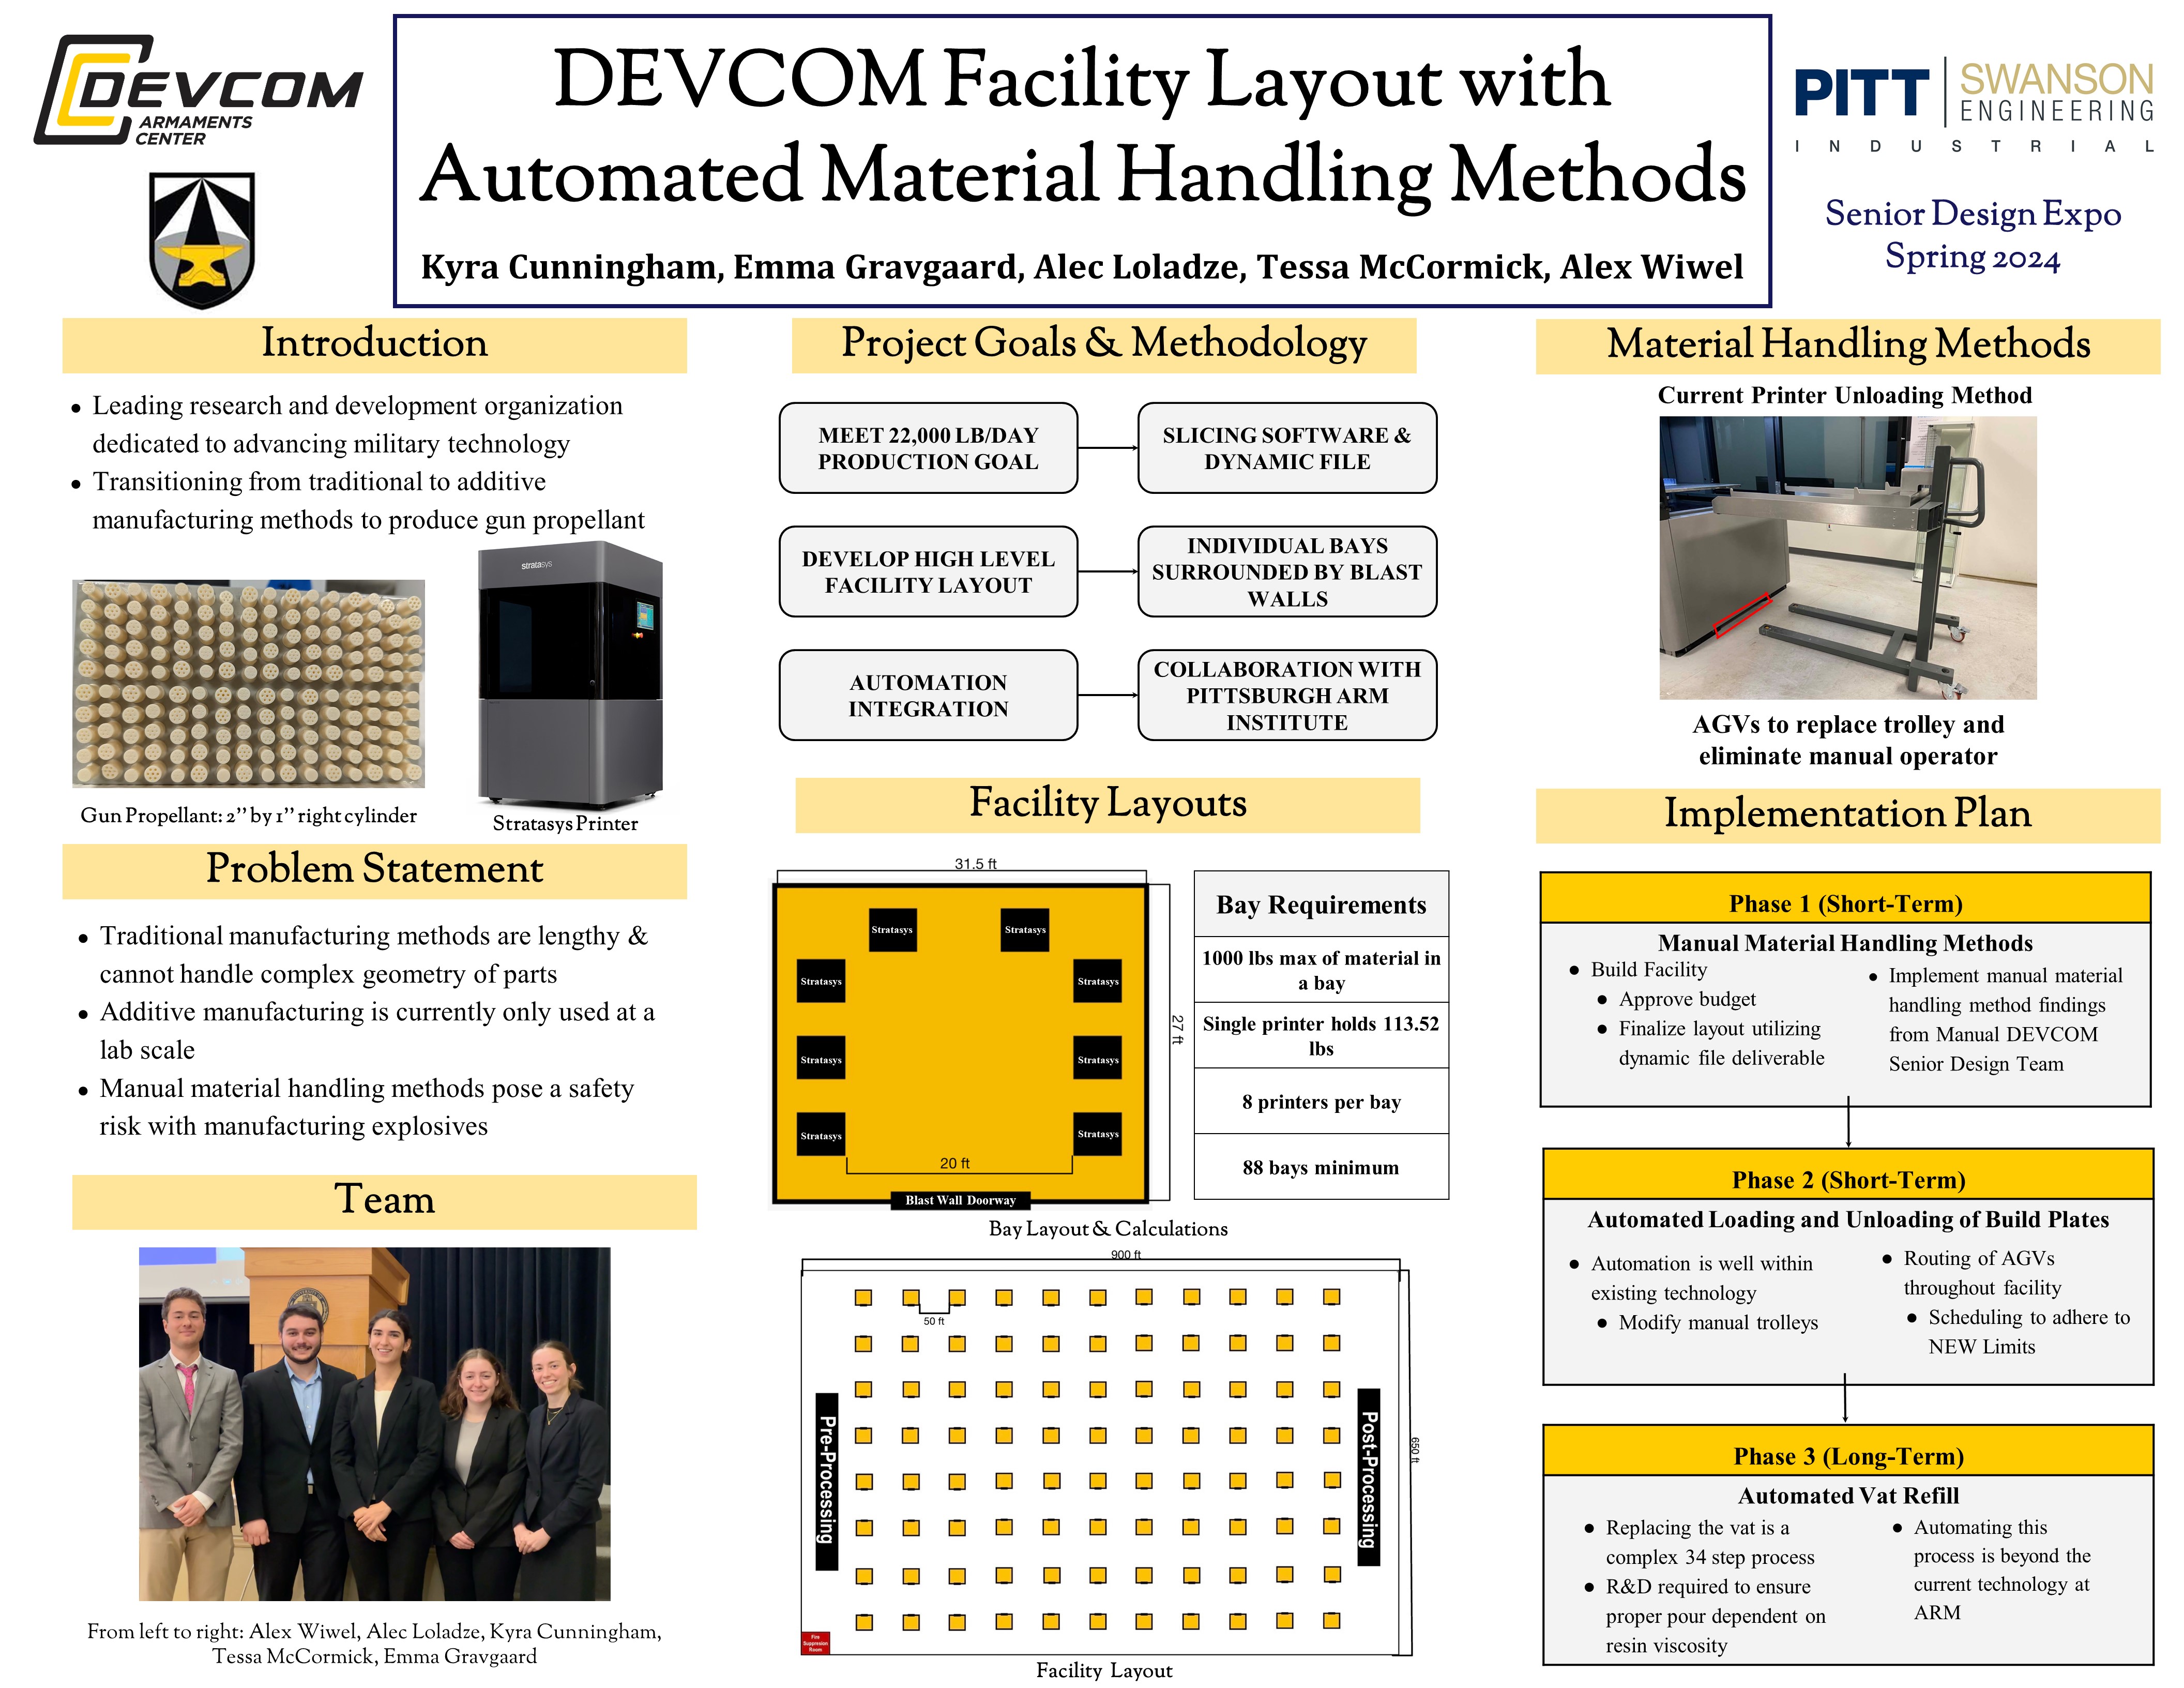 DEVCOM Facility Layout with Automated Material Handling Methods research poster overview